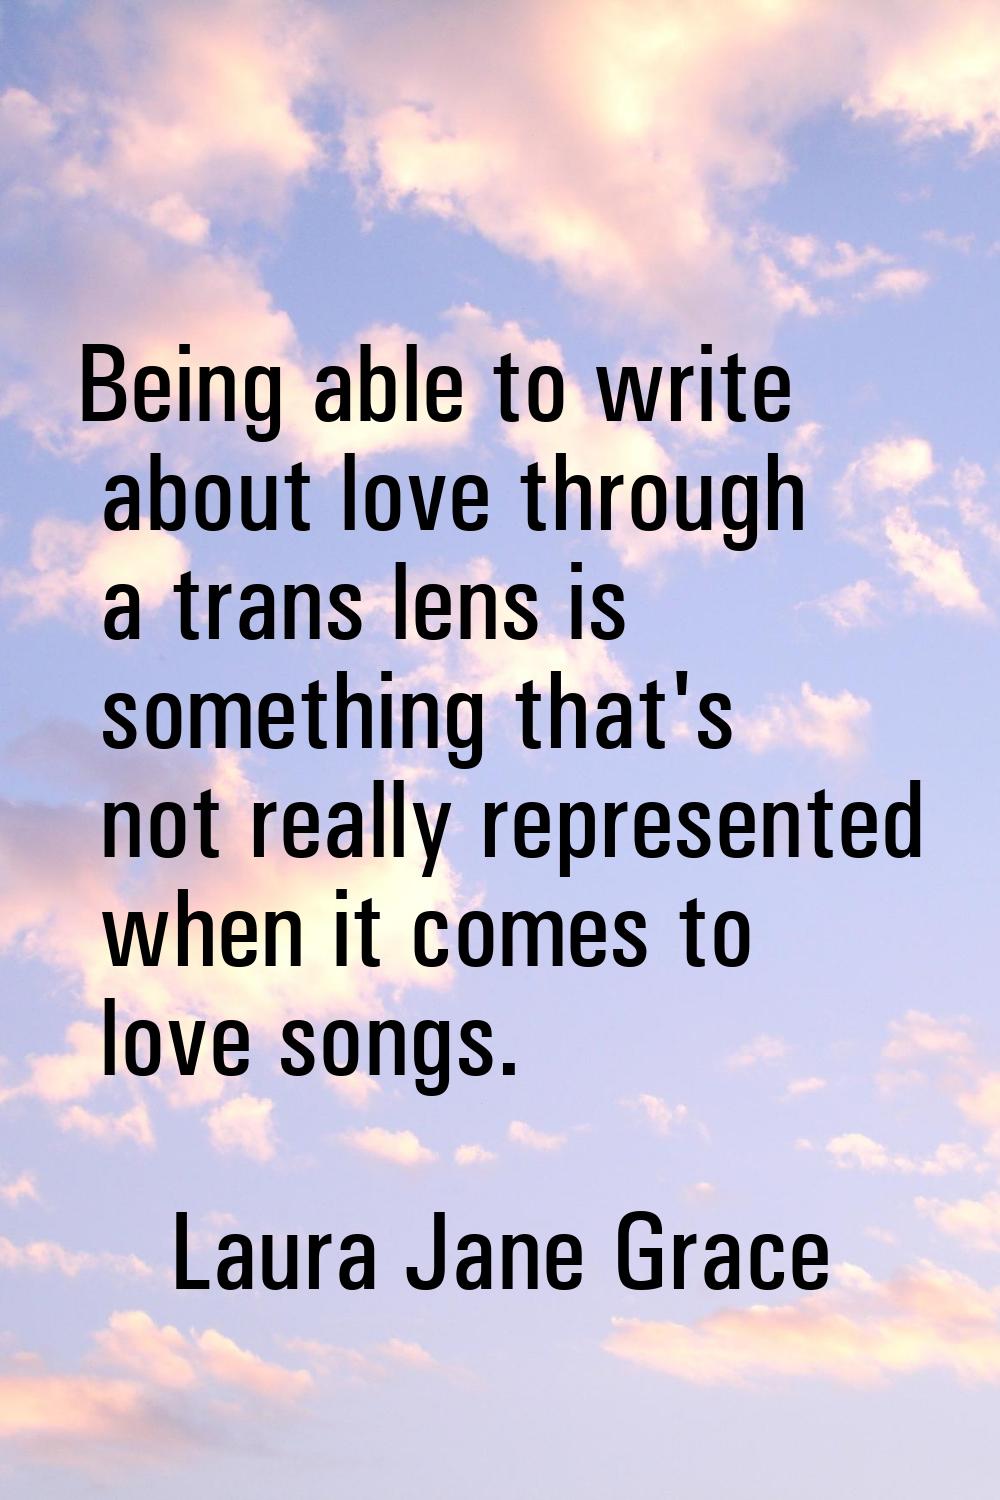 Being able to write about love through a trans lens is something that's not really represented when